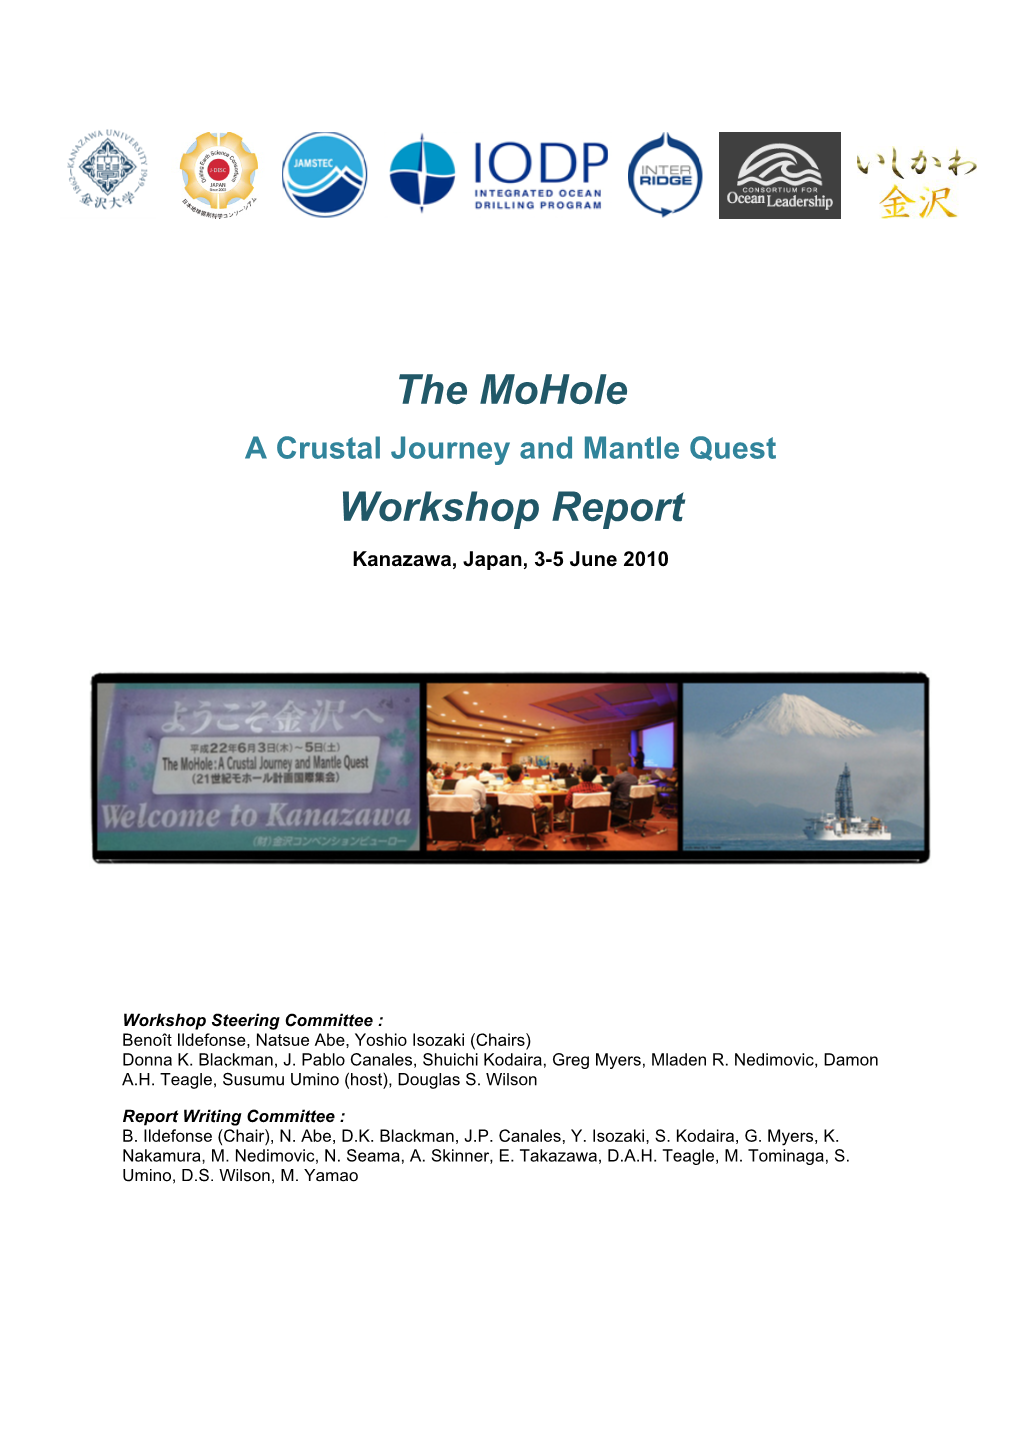 The Mohole Workshop Report